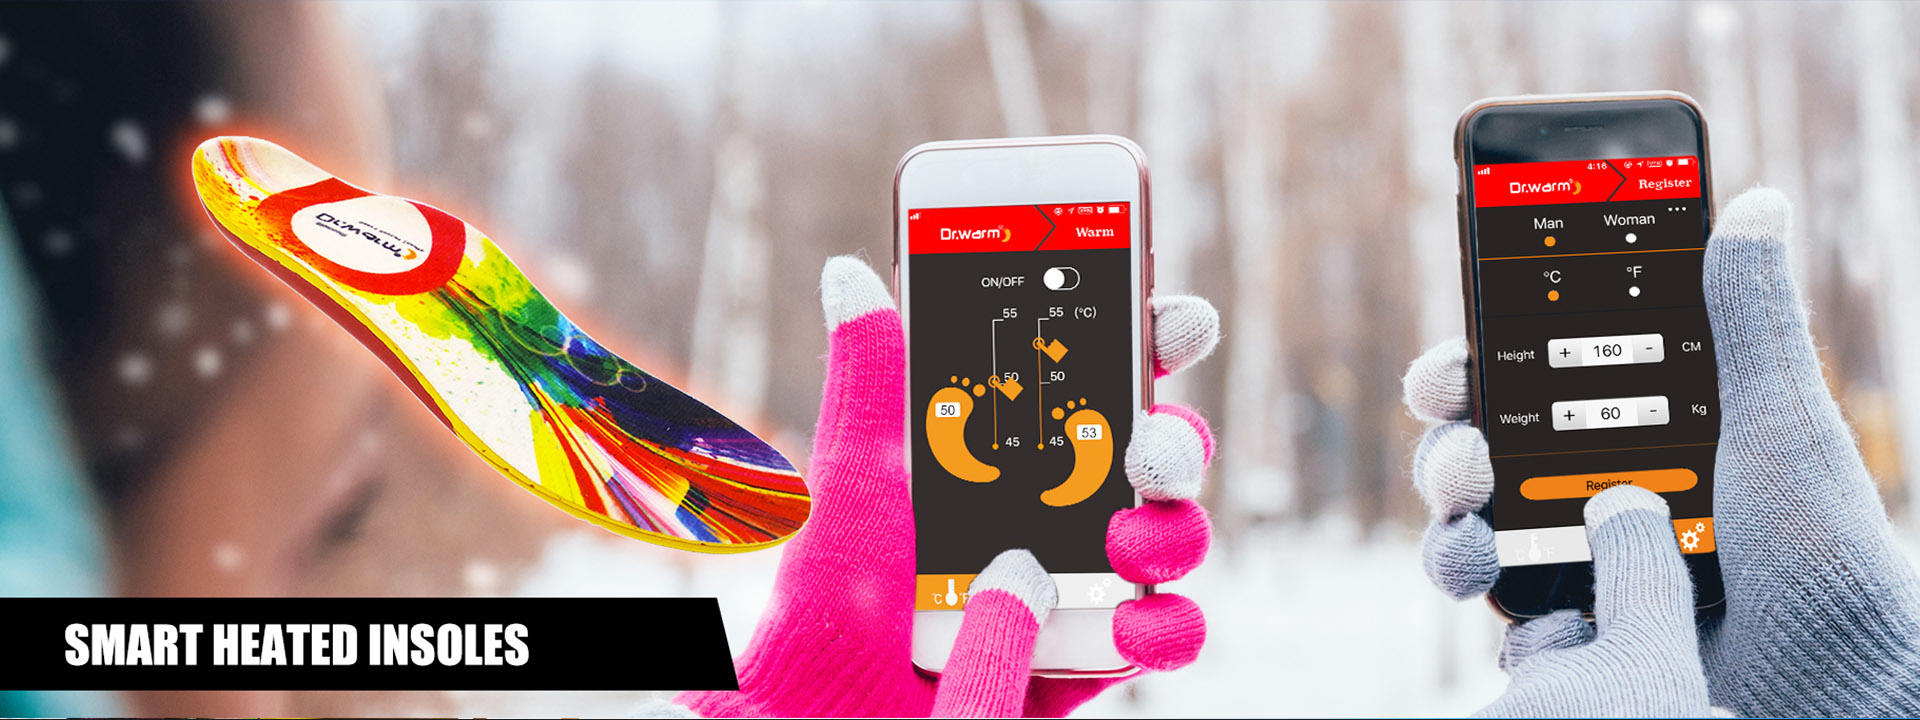 S-King-Heated Insoles | Heated Insoles Smartphone- Controlled Wireless Control